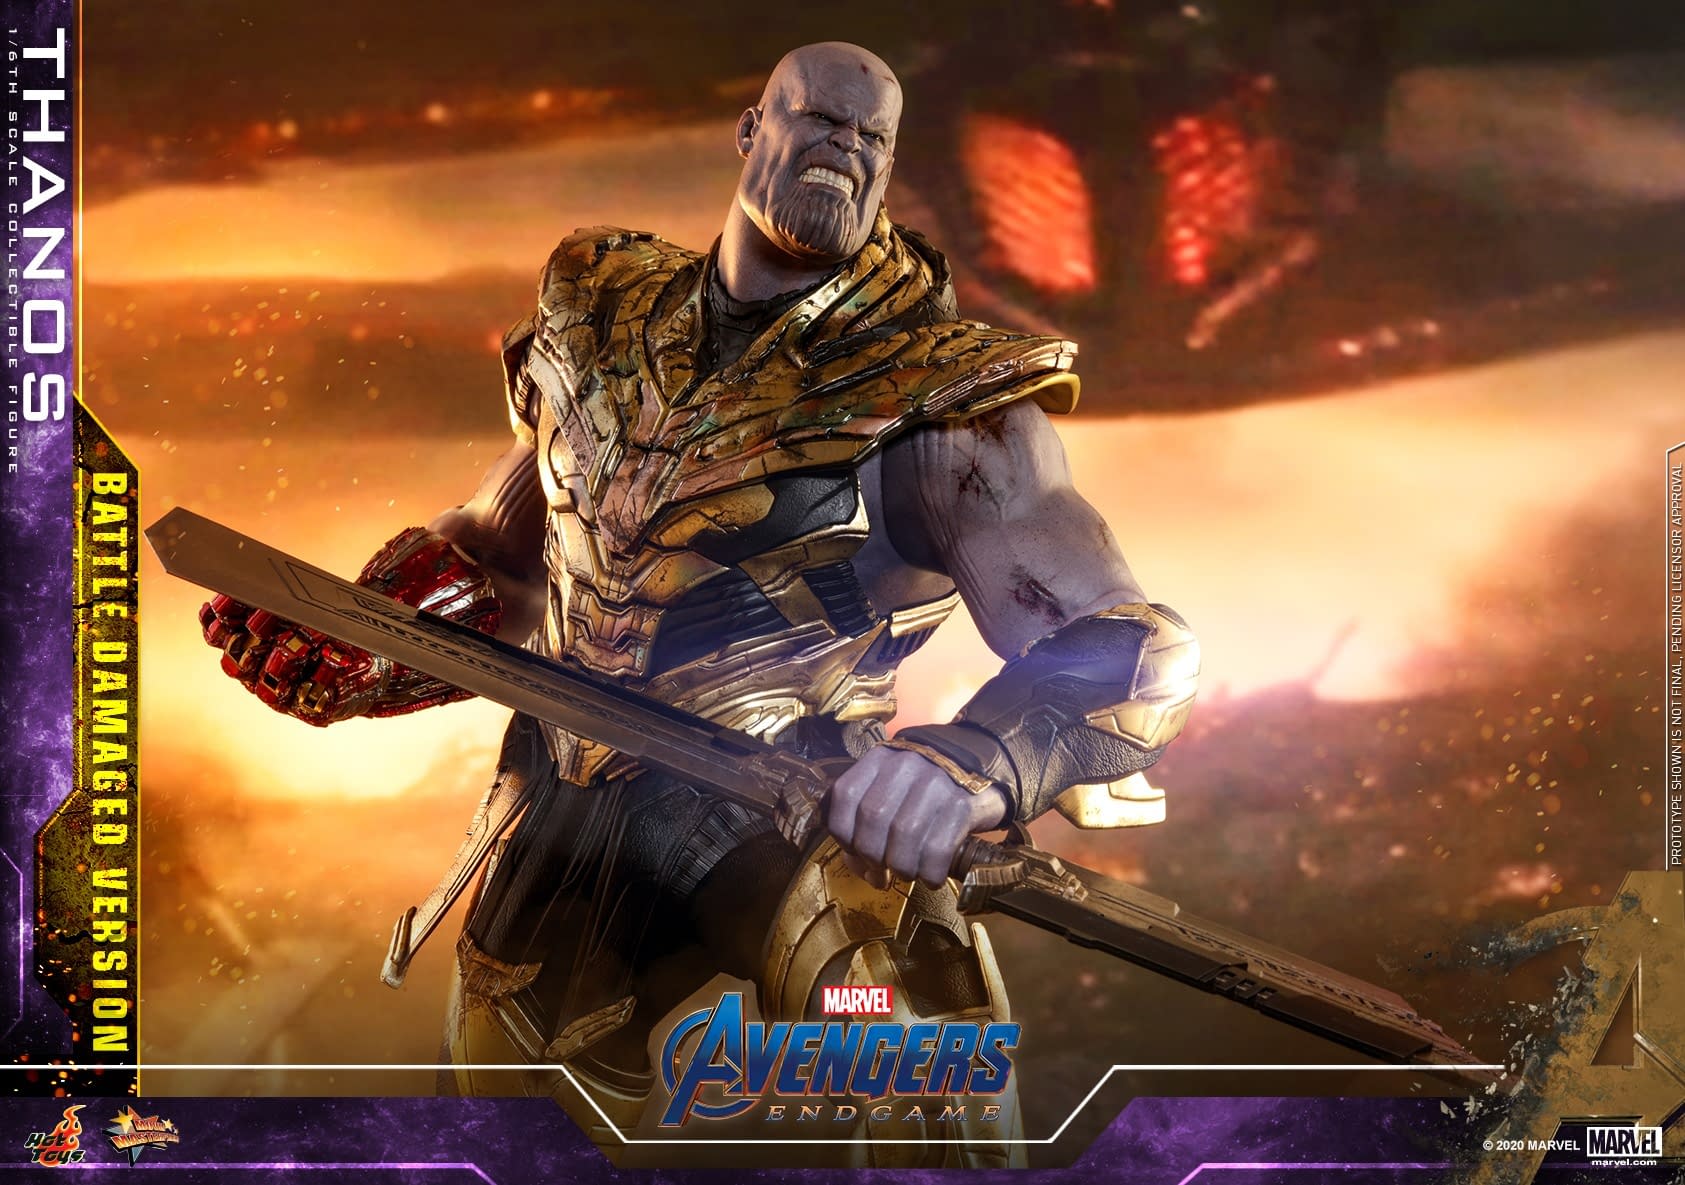 Thanos Returns to Hot Toys with New Battle Damaged Figure 